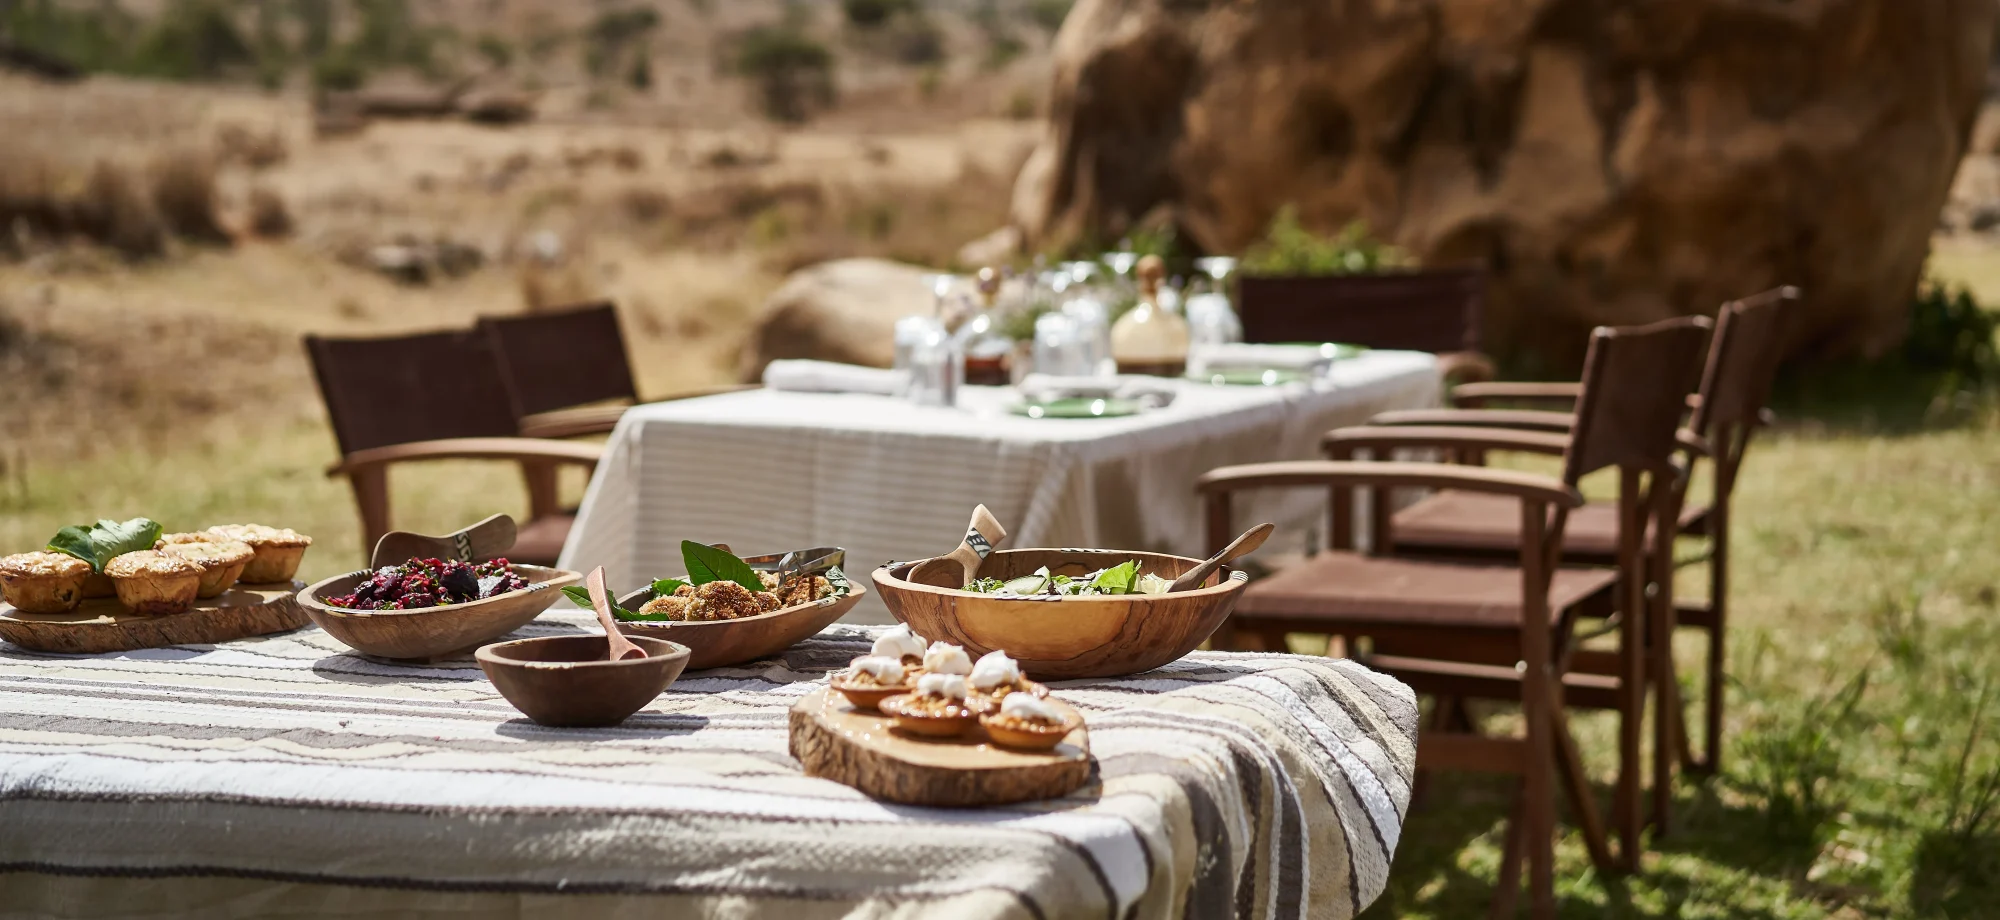 An outdoor dining spread is prepared in the midst of the Borana Conservancy during a sunny day.